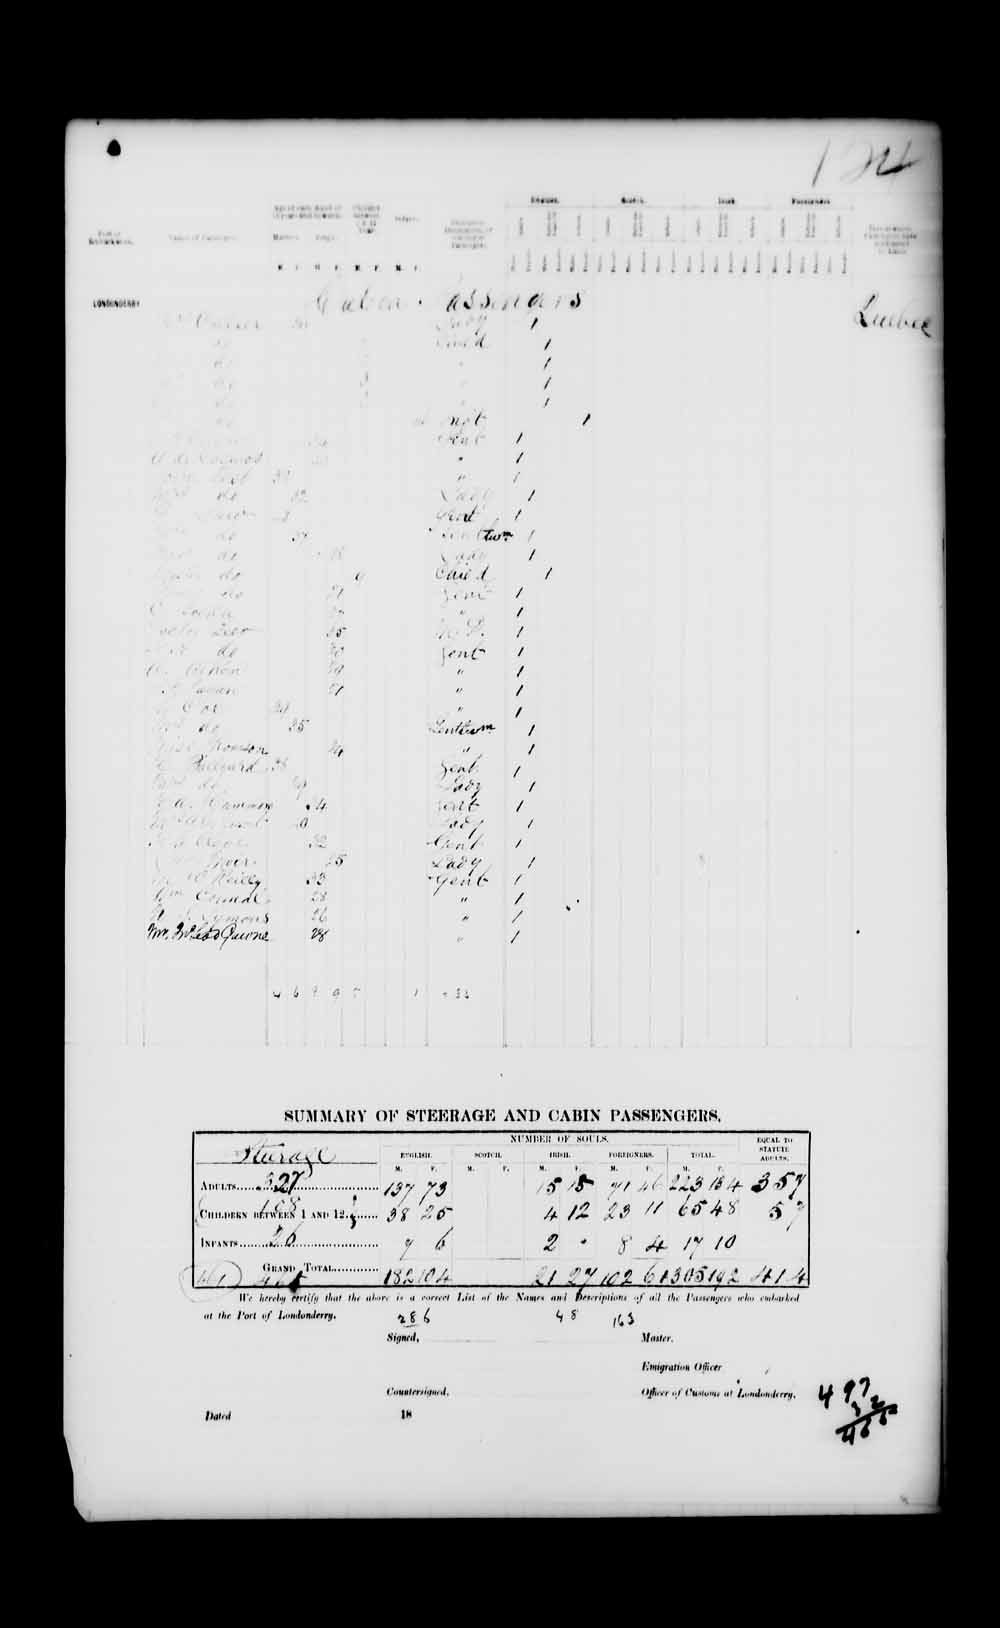 Digitized page of Passenger Lists for Image No.: e003541220